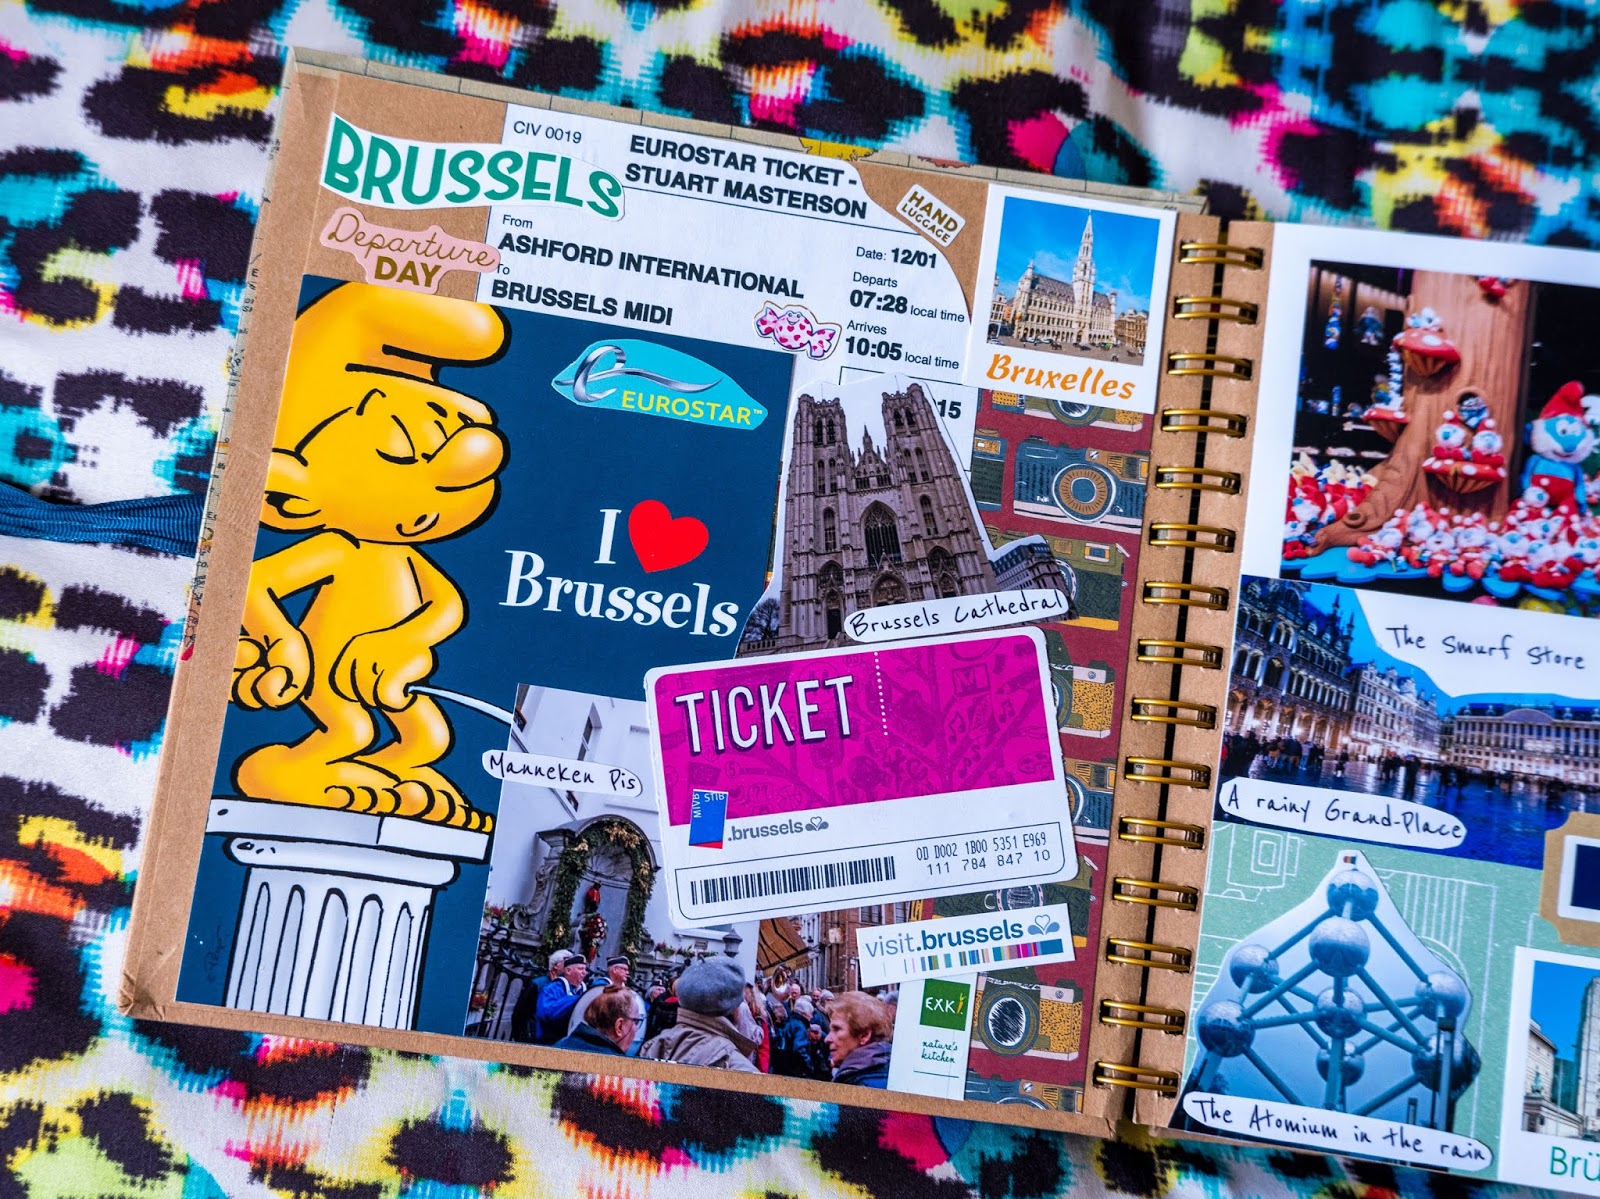 Brussels, Belgium pages in my 2019 travel scrapbooks